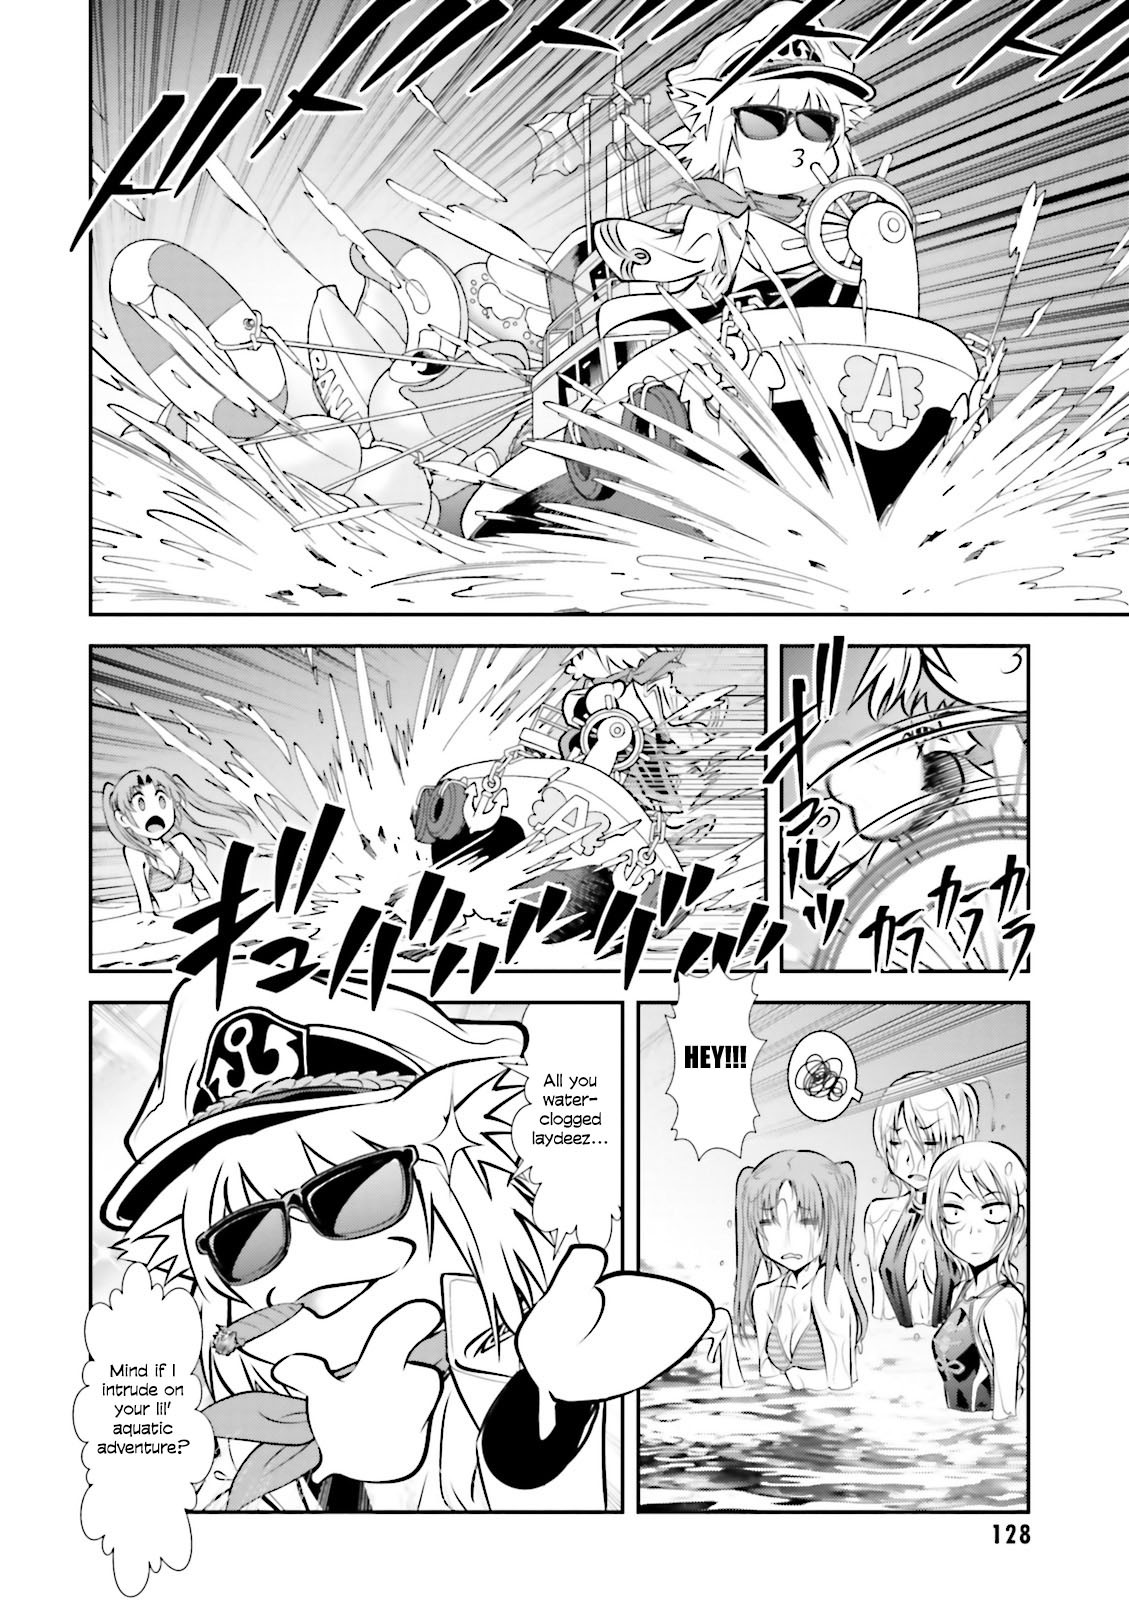 Melty Blood - Back Alley Alliance Nightmare - Page 4